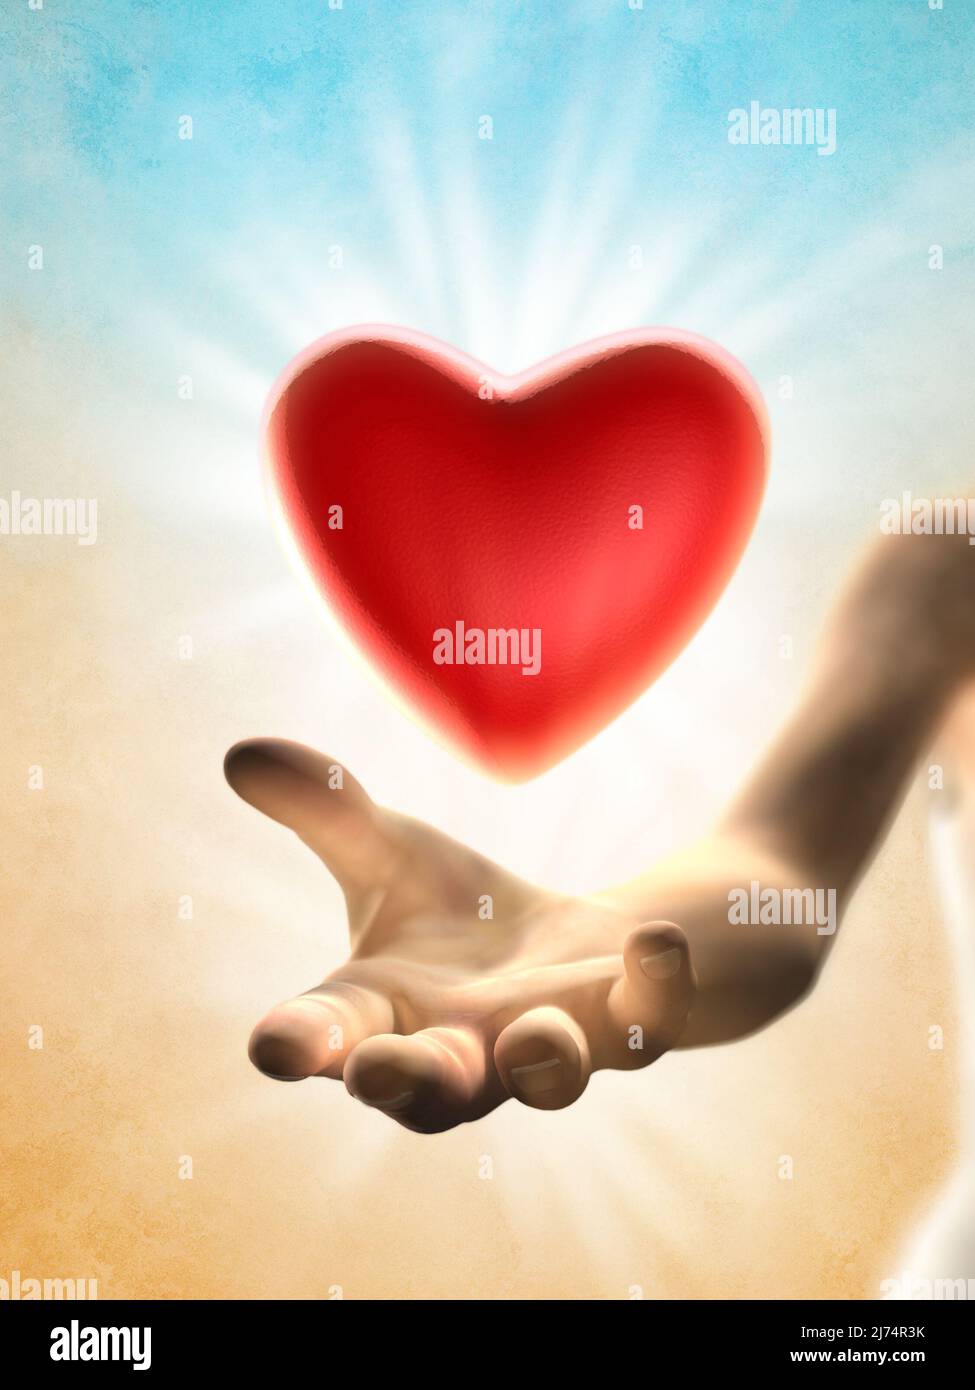 Red heart floating over a woman open hand. Digital illustration. Stock Photo